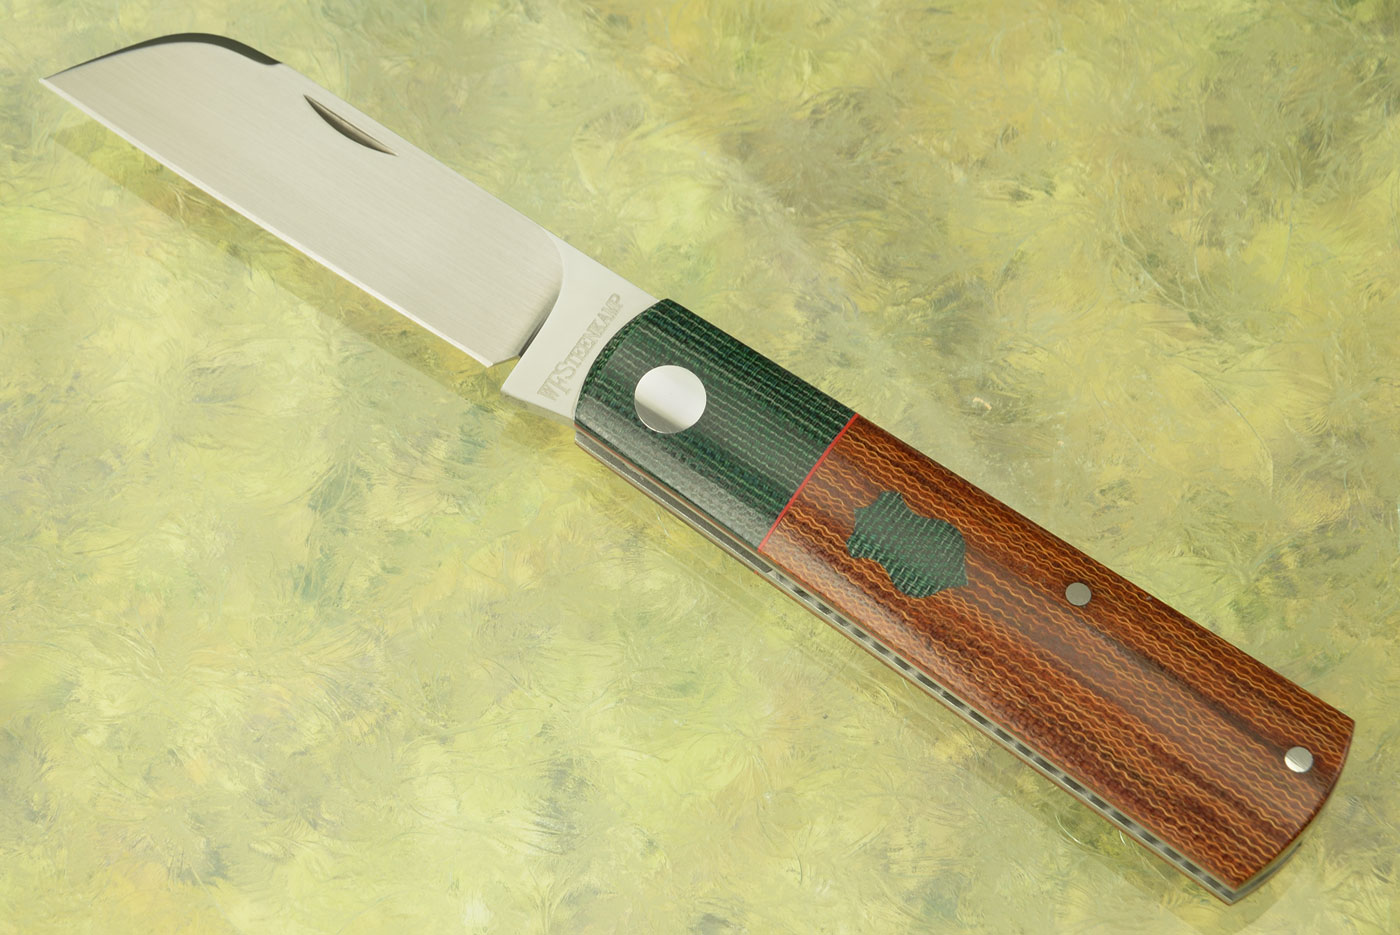 Barlow Slipjoint with Crosscut and Green Micarta - RWL-34